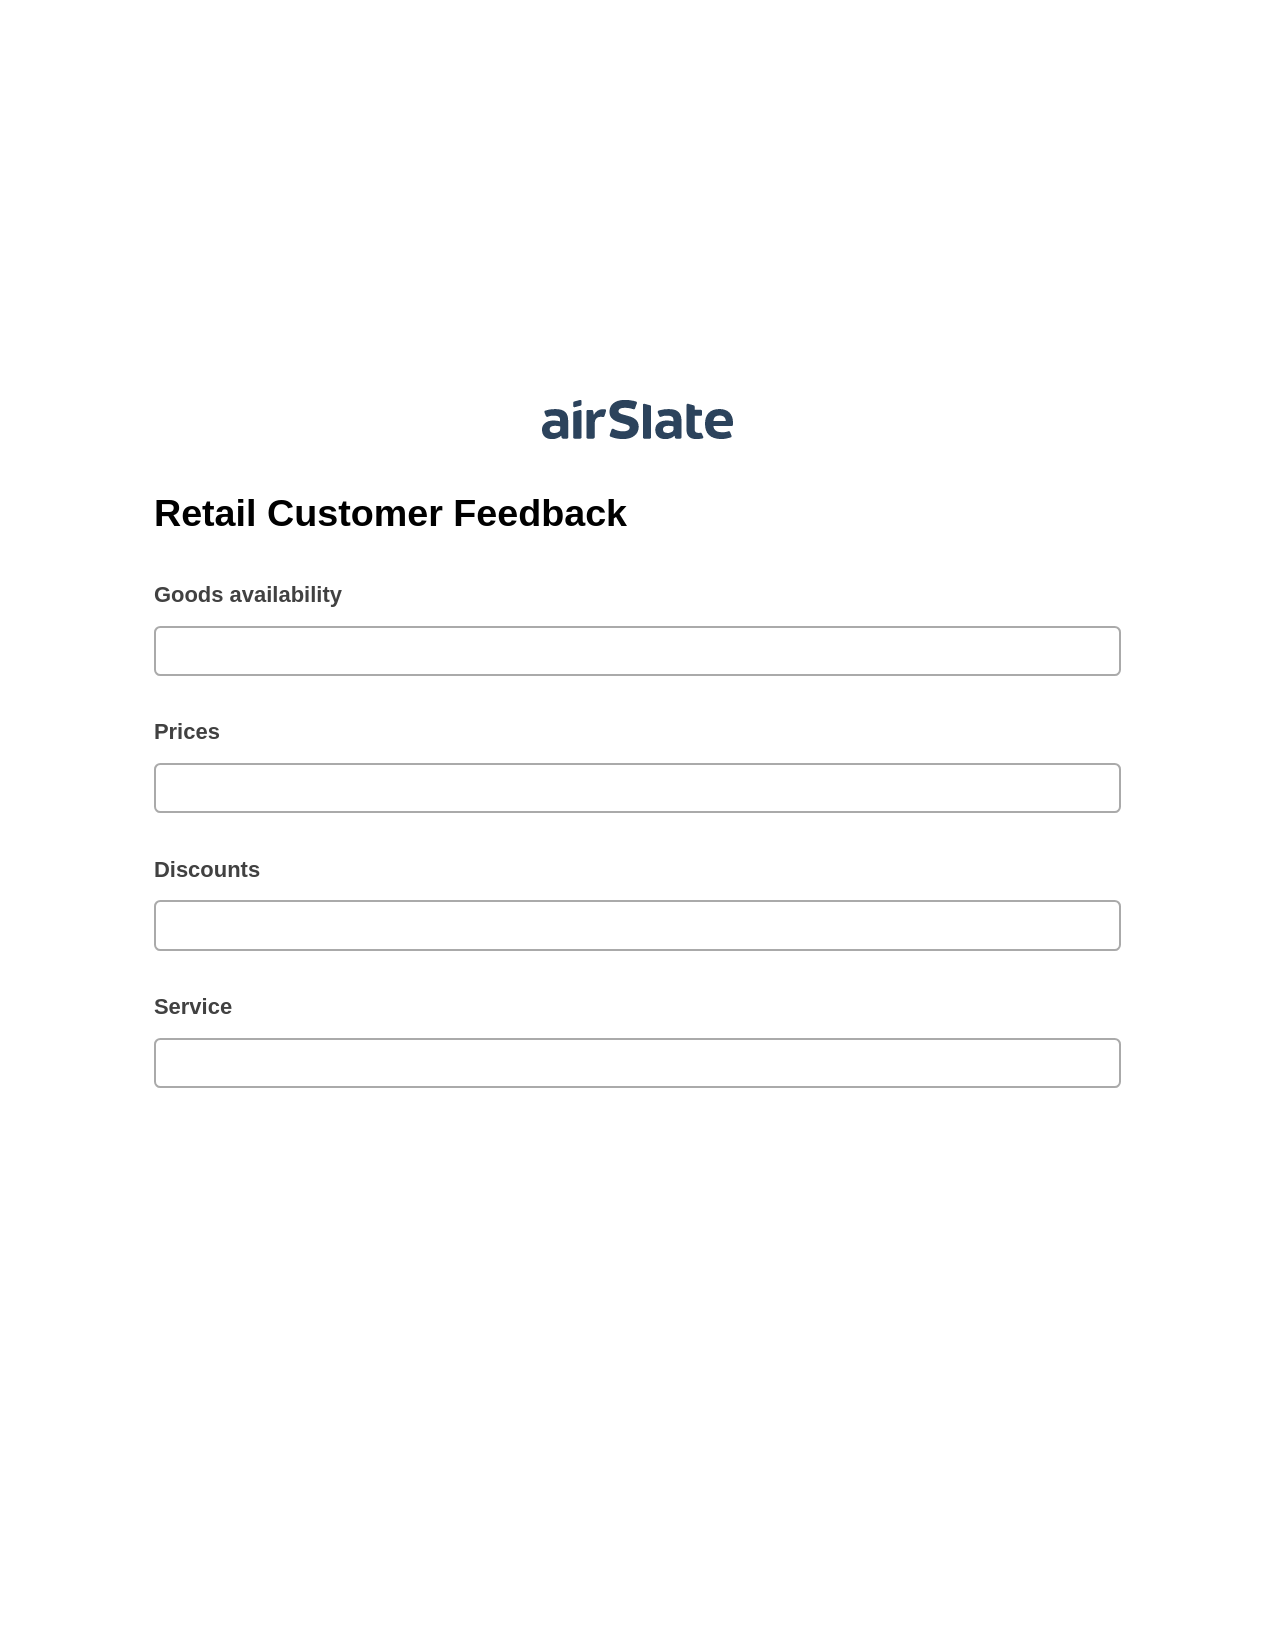 Retail Customer Feedback Pre-fill Dropdowns from CSV File Bot, Create NetSuite Records Bot, Post-finish Document Bot